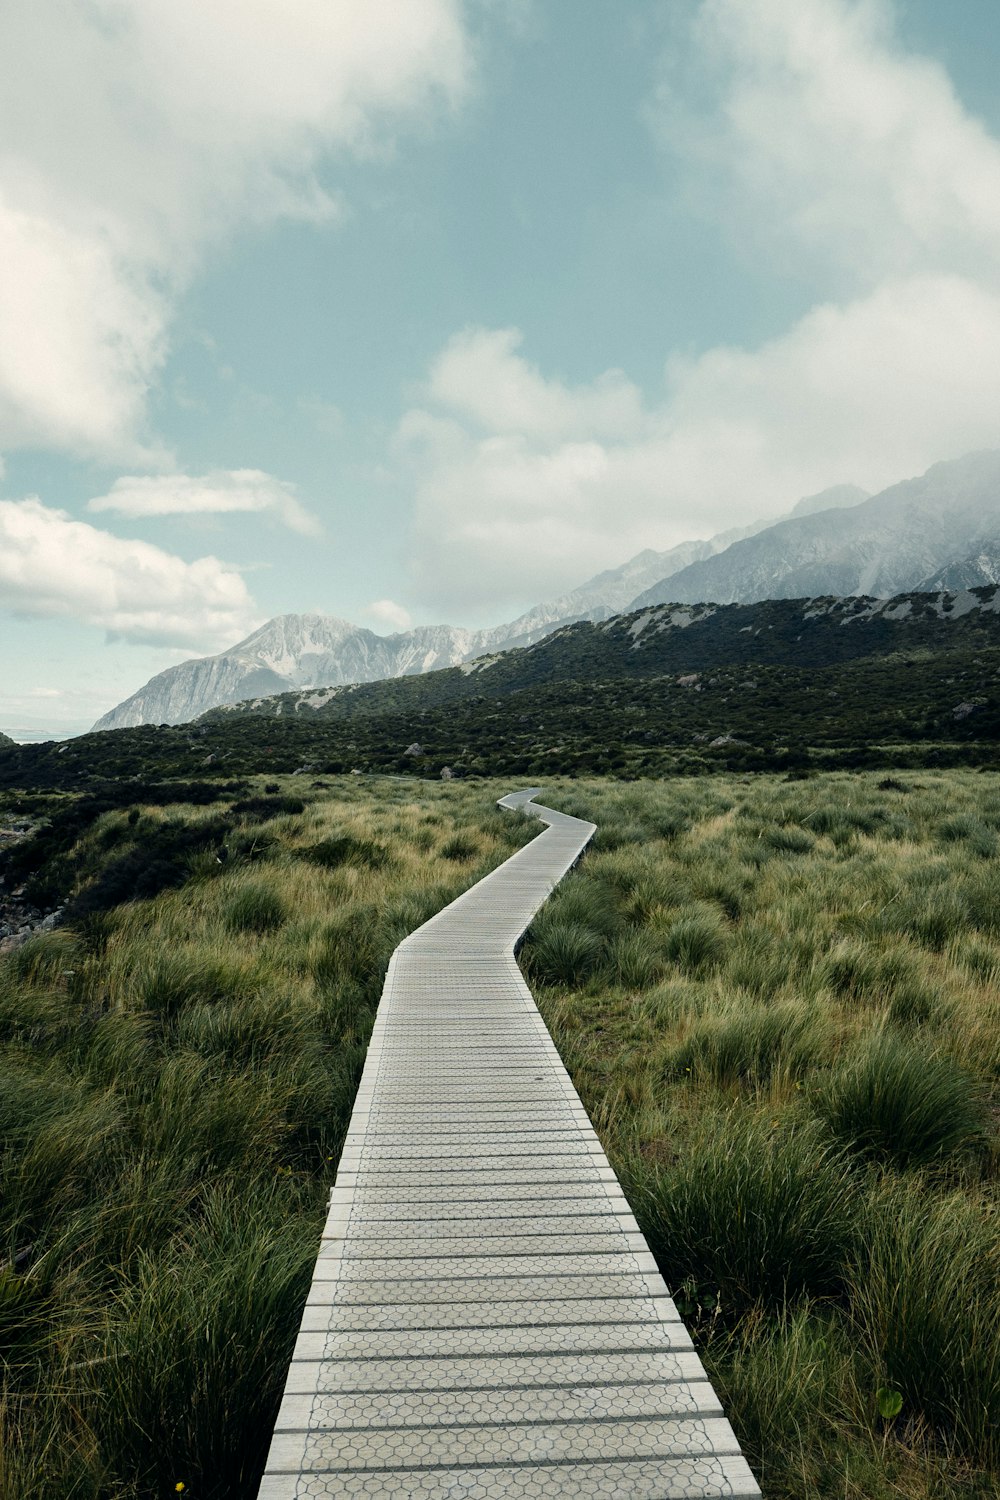 white wooden pathway on green grass field near mountains during daytime